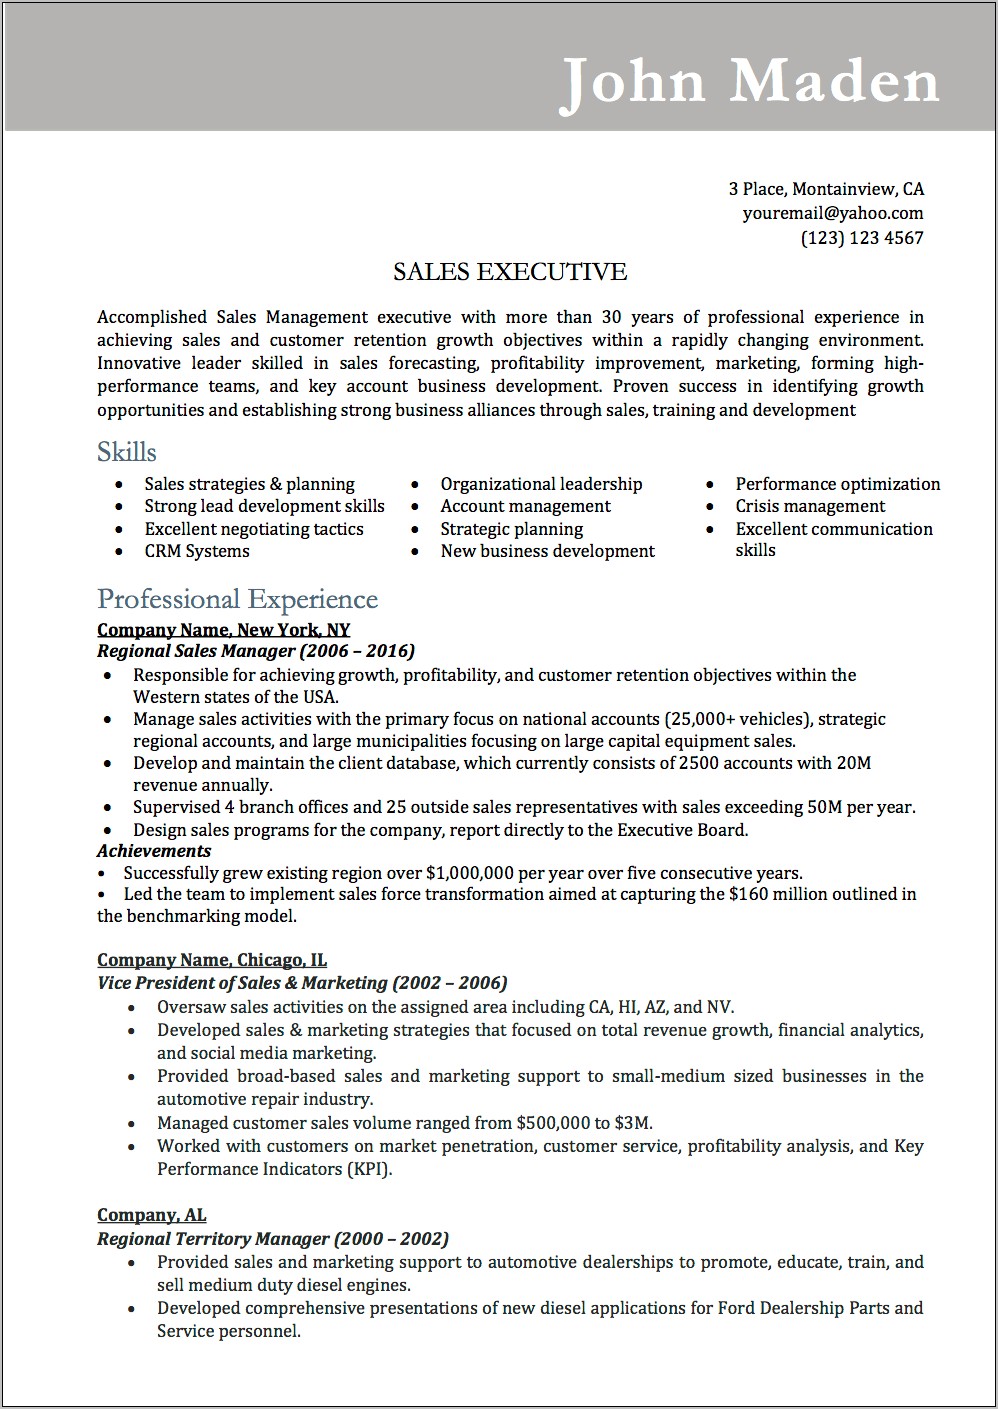 list-of-skills-to-include-on-resume-resume-example-gallery